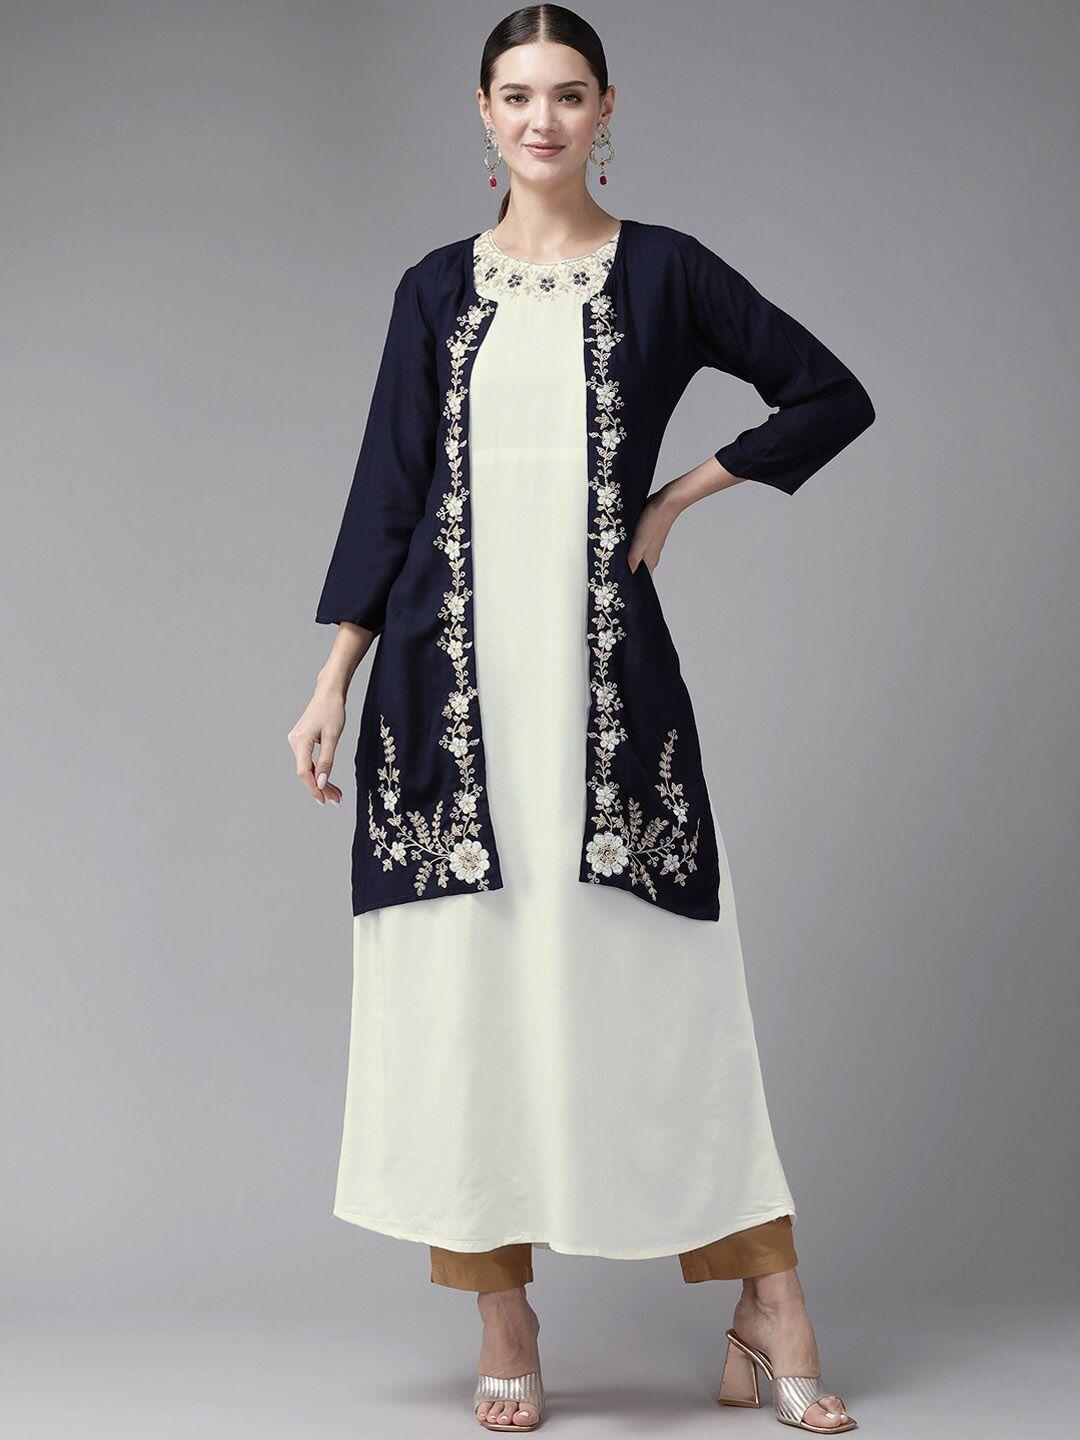 baesd floral embroidered cotton kurta with a jacket